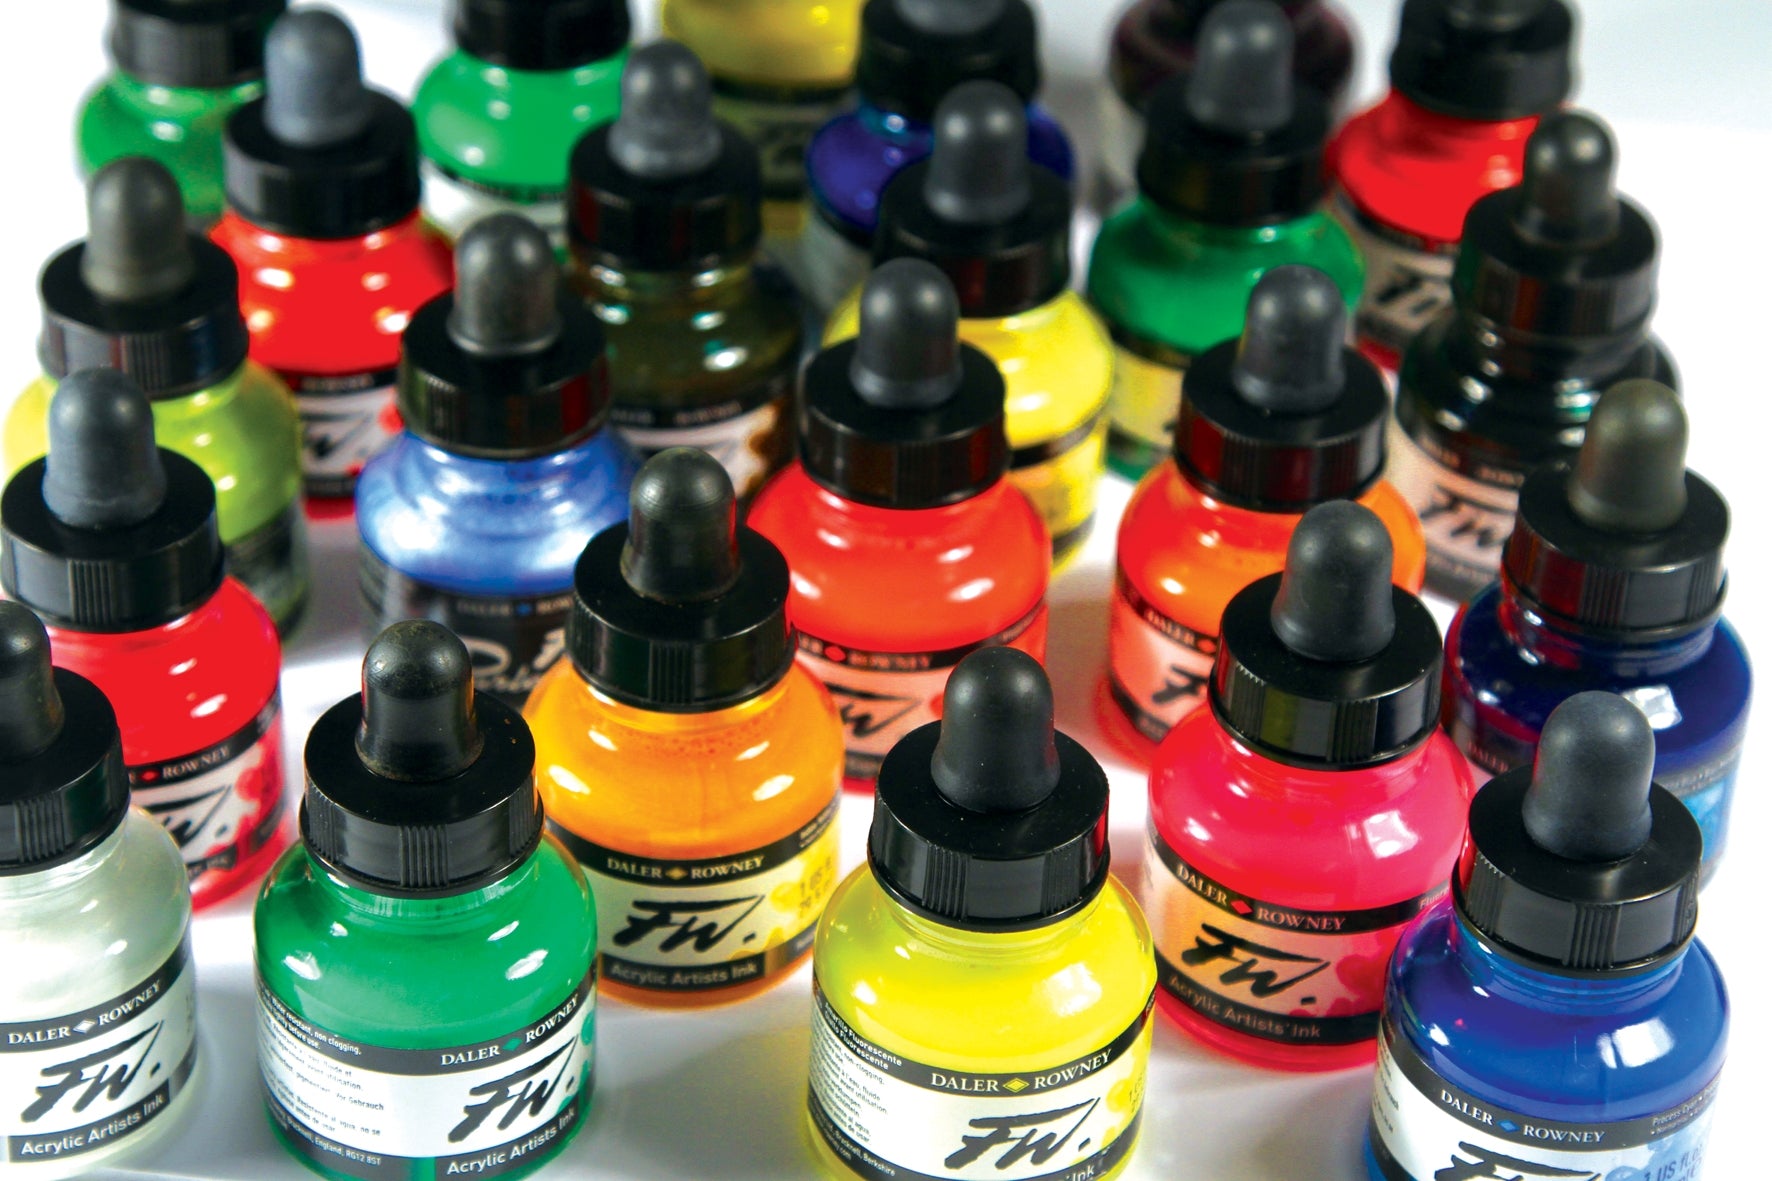 Daler-Rowney FW Acrylic Artists Ink,Primary Set